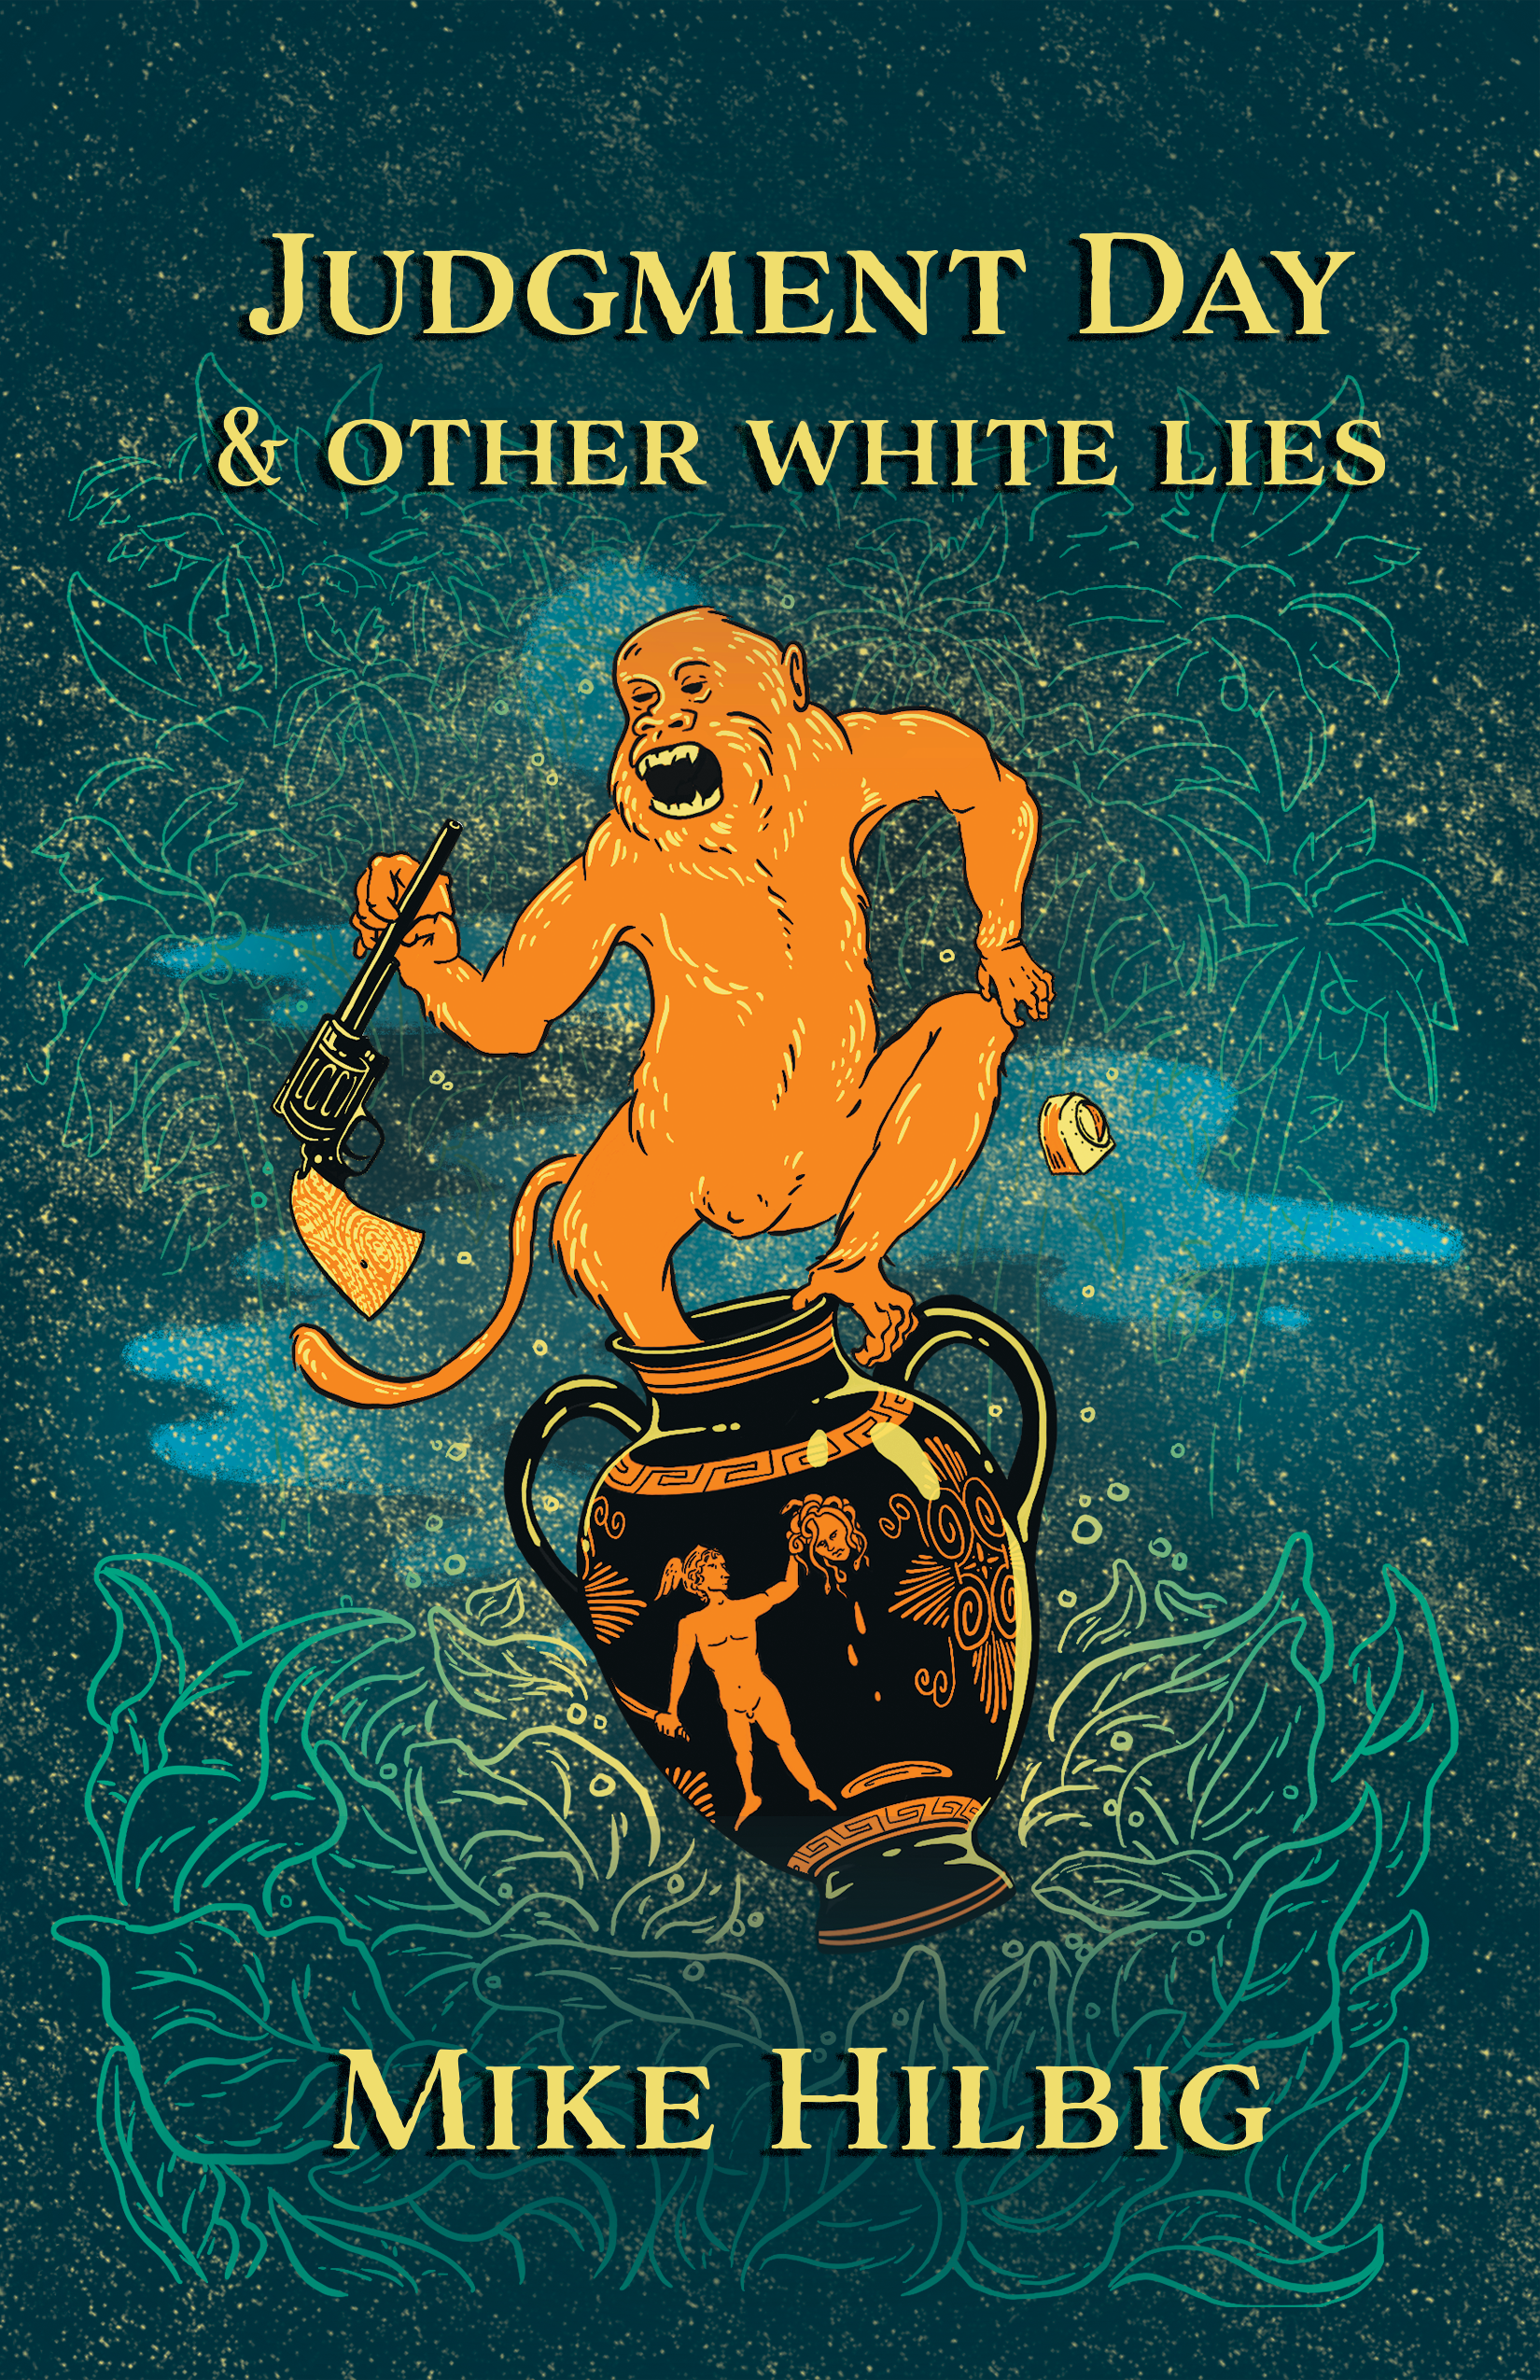 Judgment Day & Other White Lies by Mike Hilbig. Front cover shows an orangutan with a gun and an egg timer balancing on the rim of a Greek Urn with Perseus holding the Medusa's head.